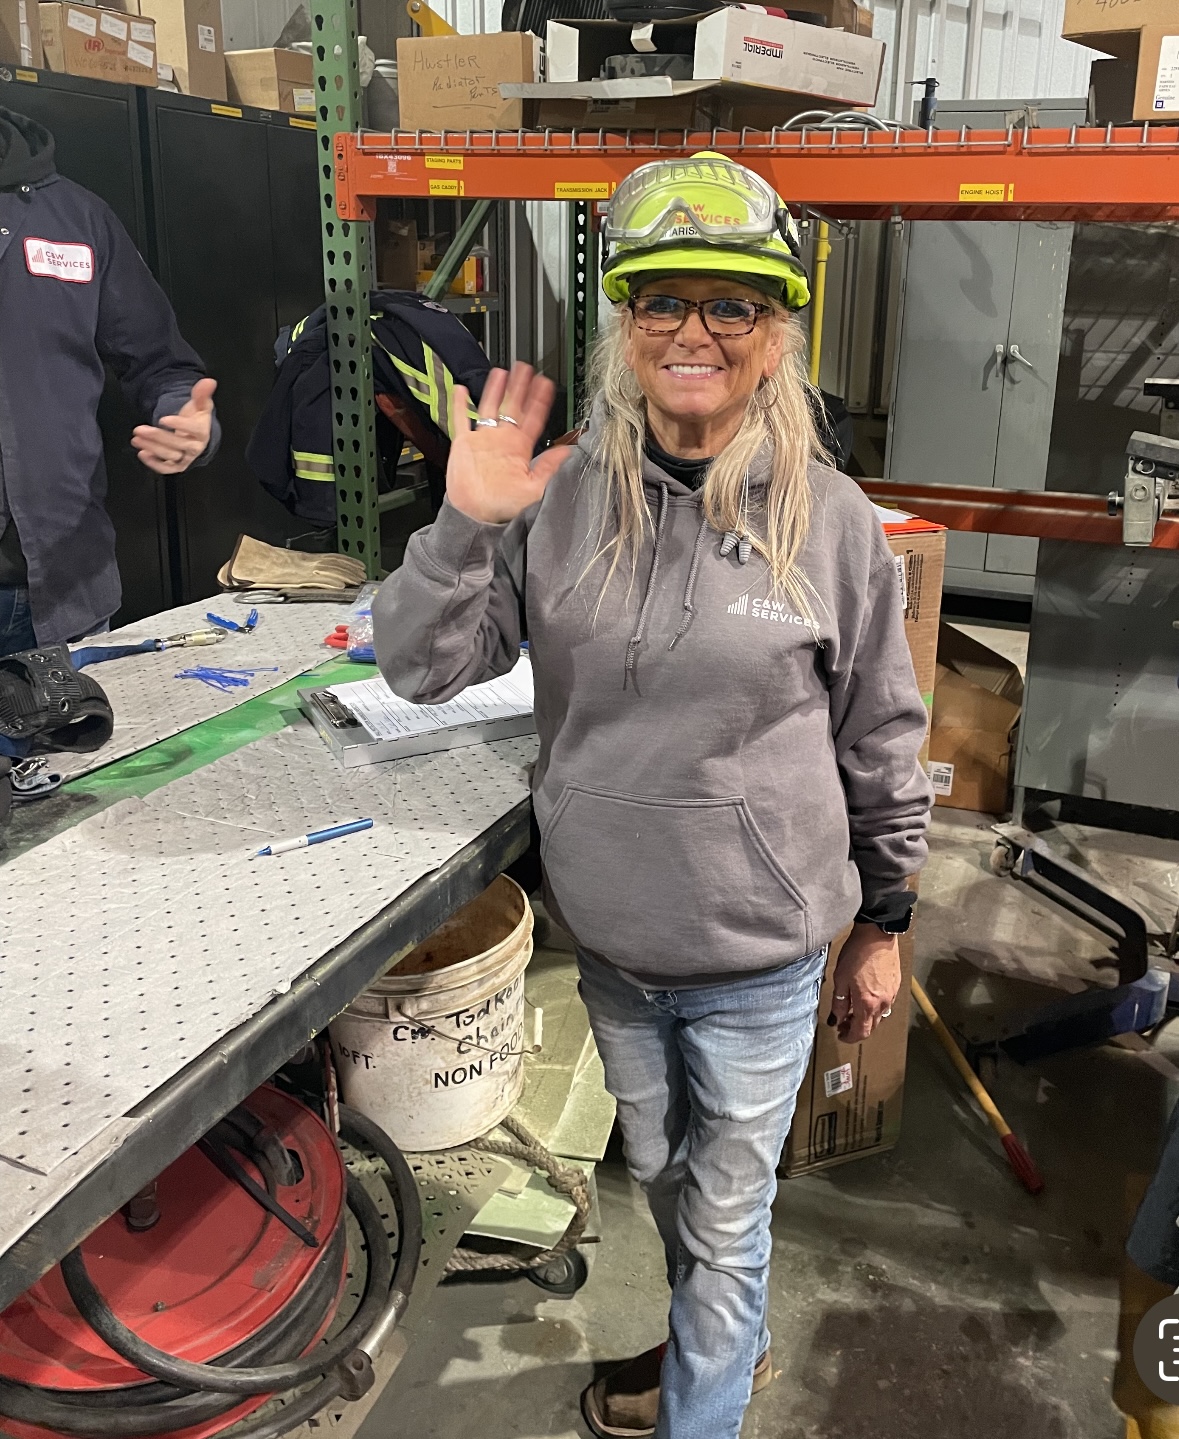 A woman in a grey hoodie and yellow hard hat waves at the camera in an industrial workshop setting.